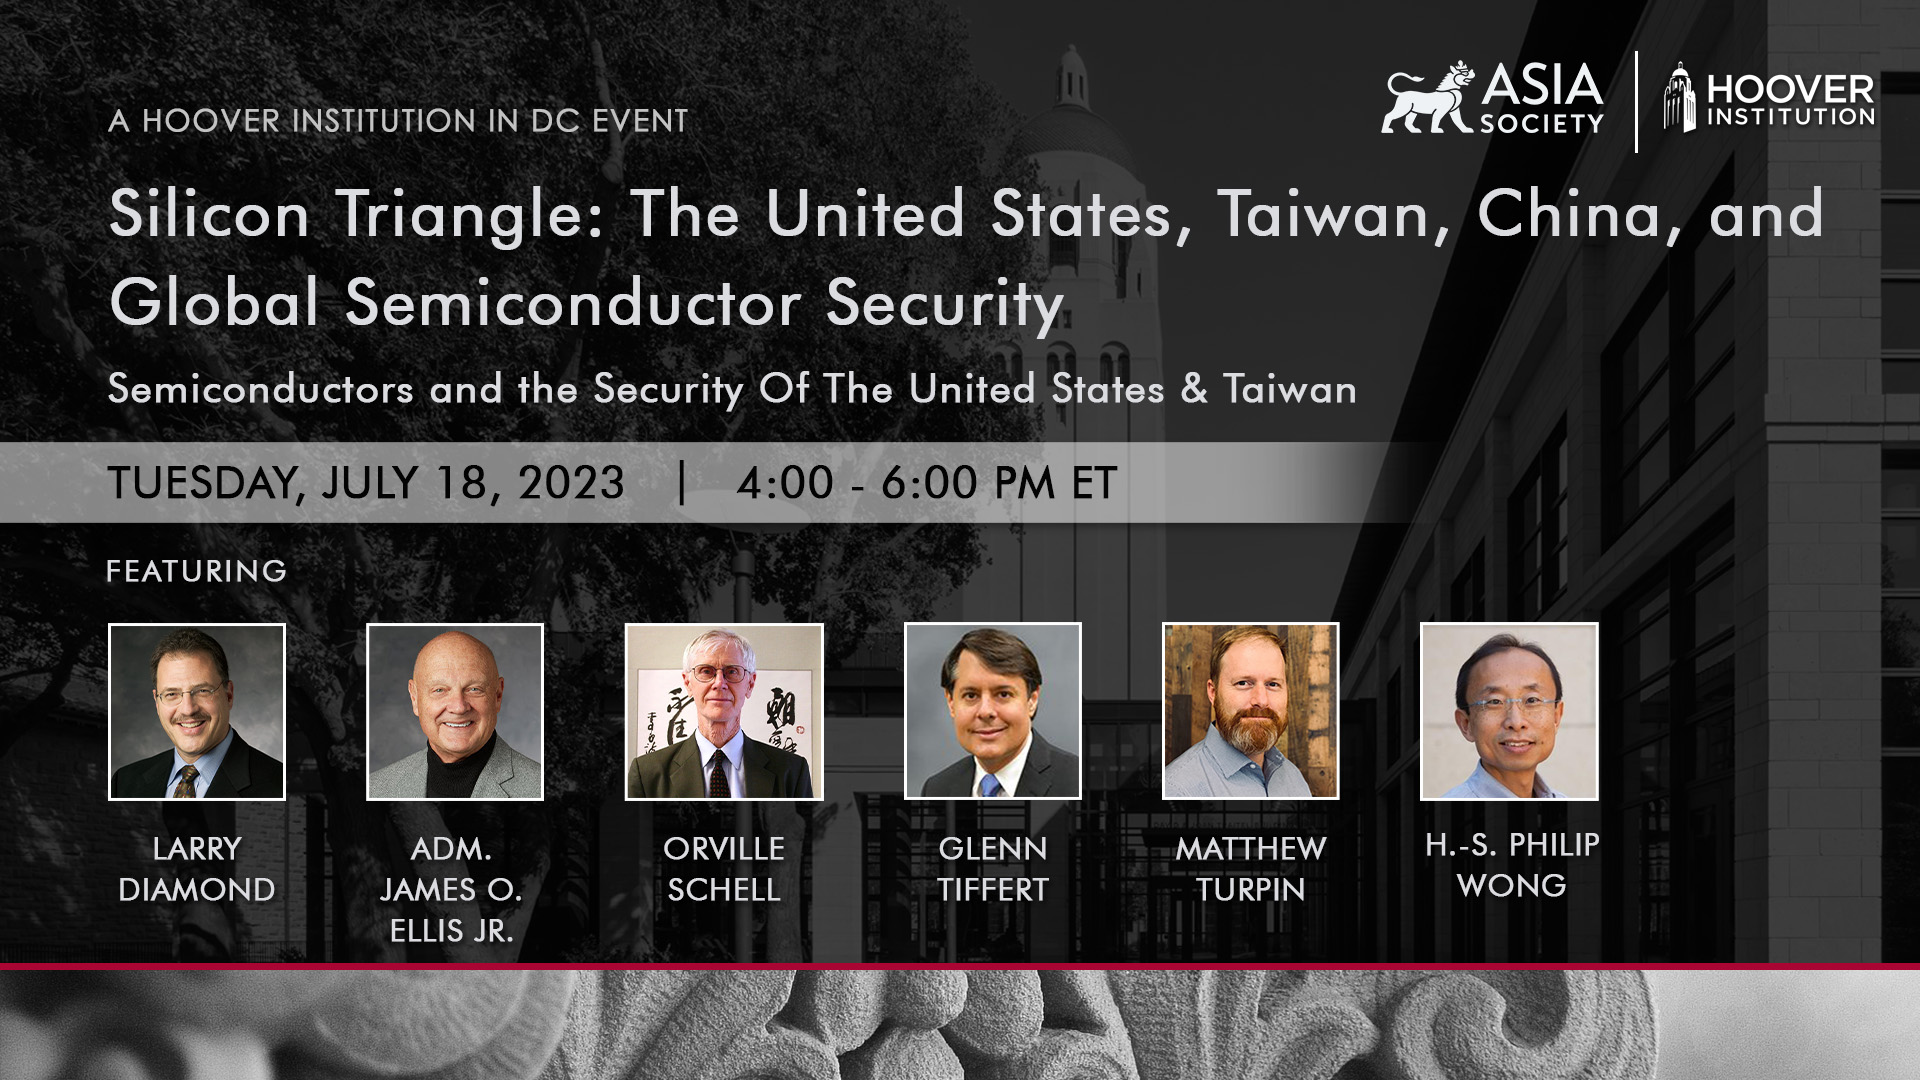 Silicon Triangle: The United States, Taiwan, China, And Global Semiconductor Security